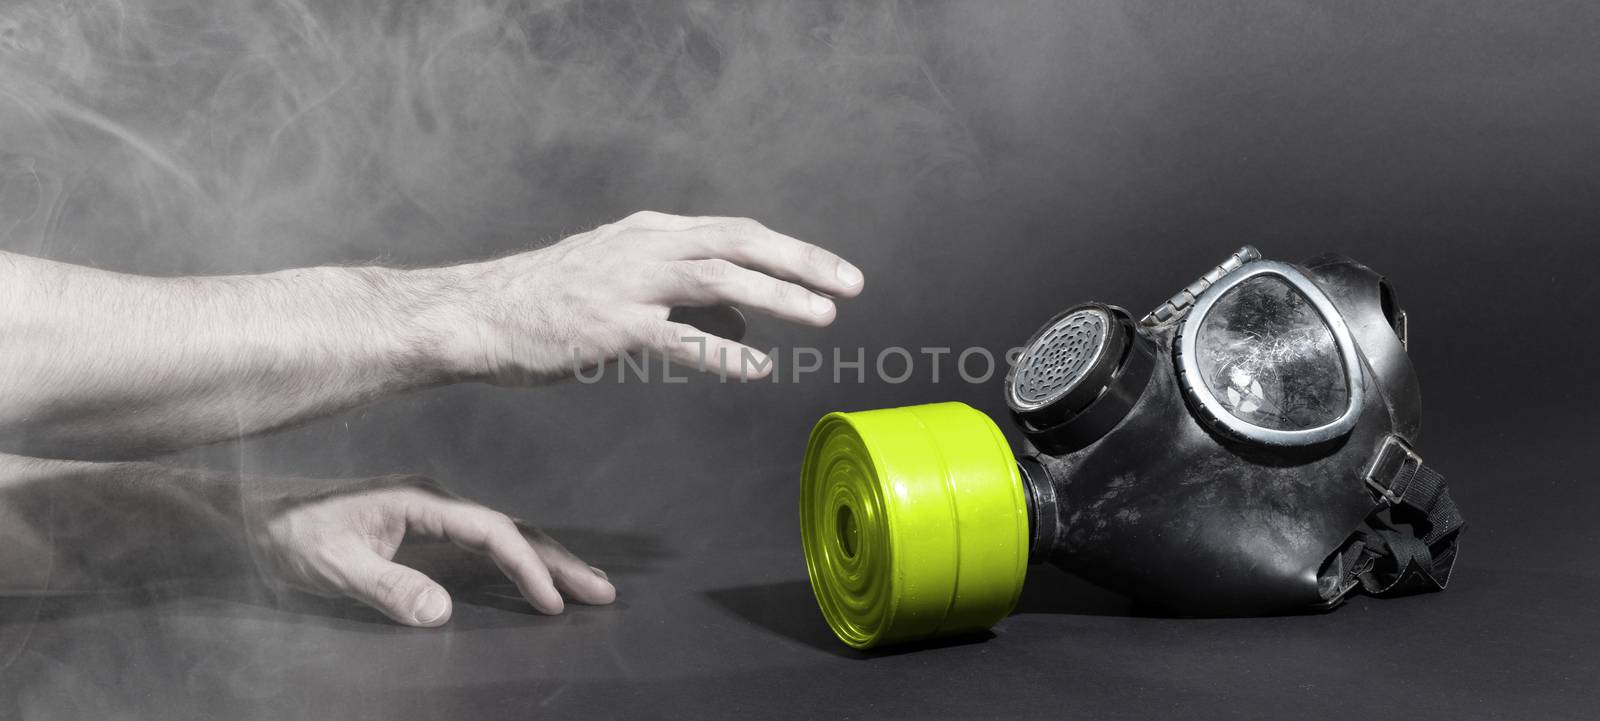 Man in room filled with smoke, trying to reach for vintage gasmask - Isolated on black - Green filter